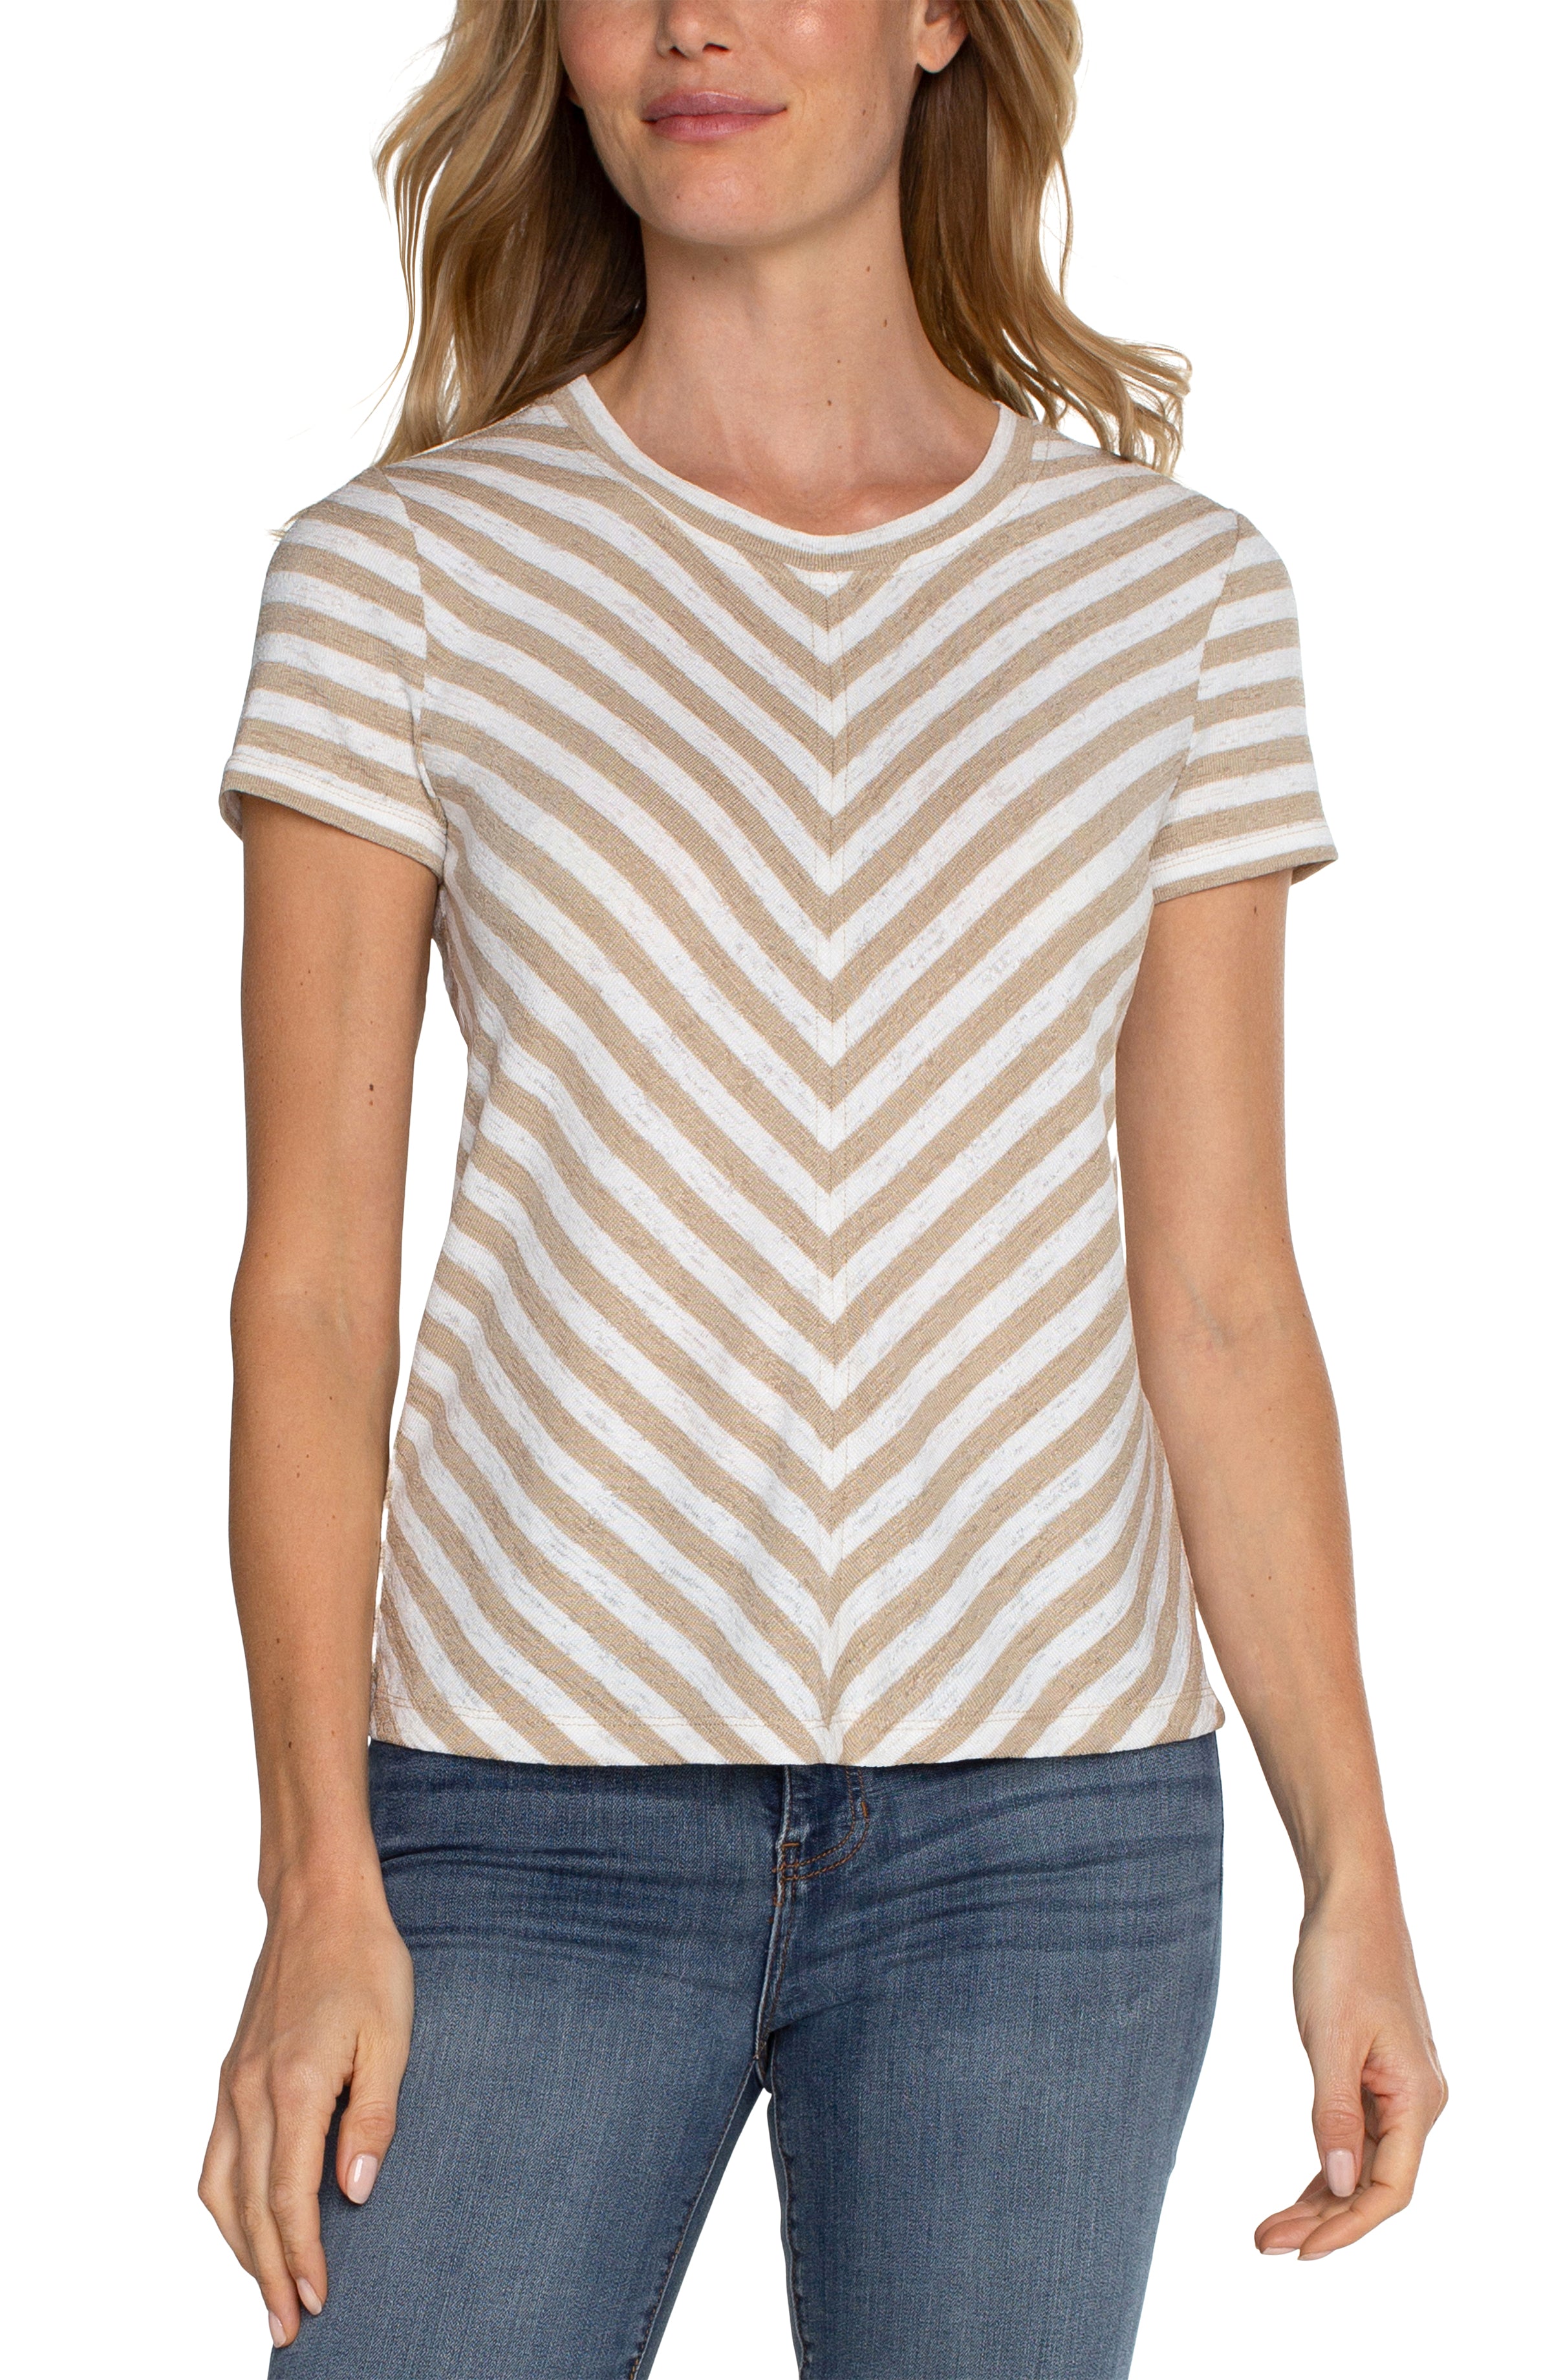 LVP Short Sleeve Kit Top - Cream with Tan Stripe Front View